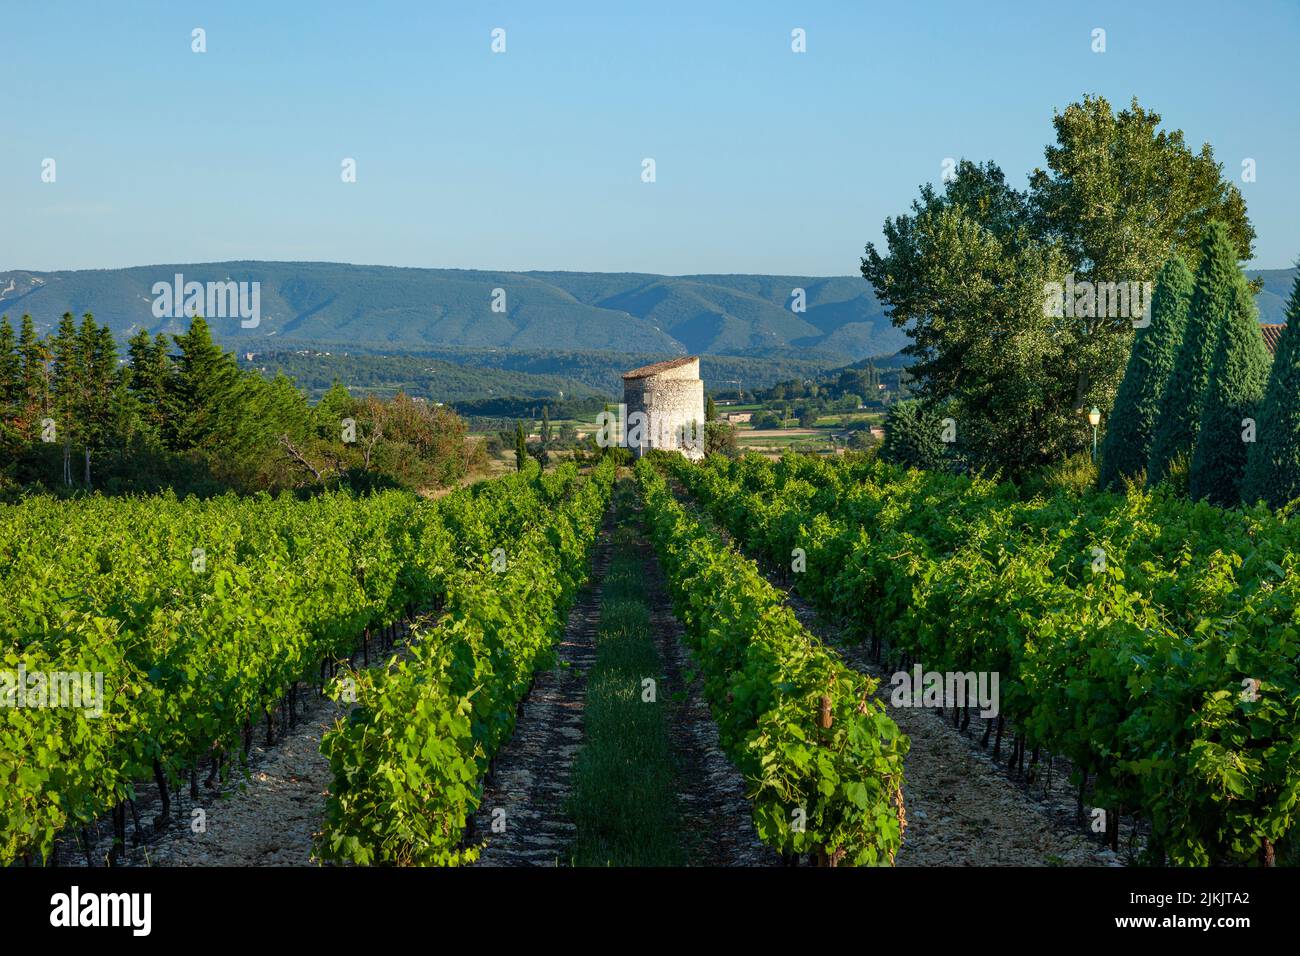 Small vineyard and vacation rental home near Gordes with the Massif of the Luberon Mountains beyond, Provence, France Stock Photo